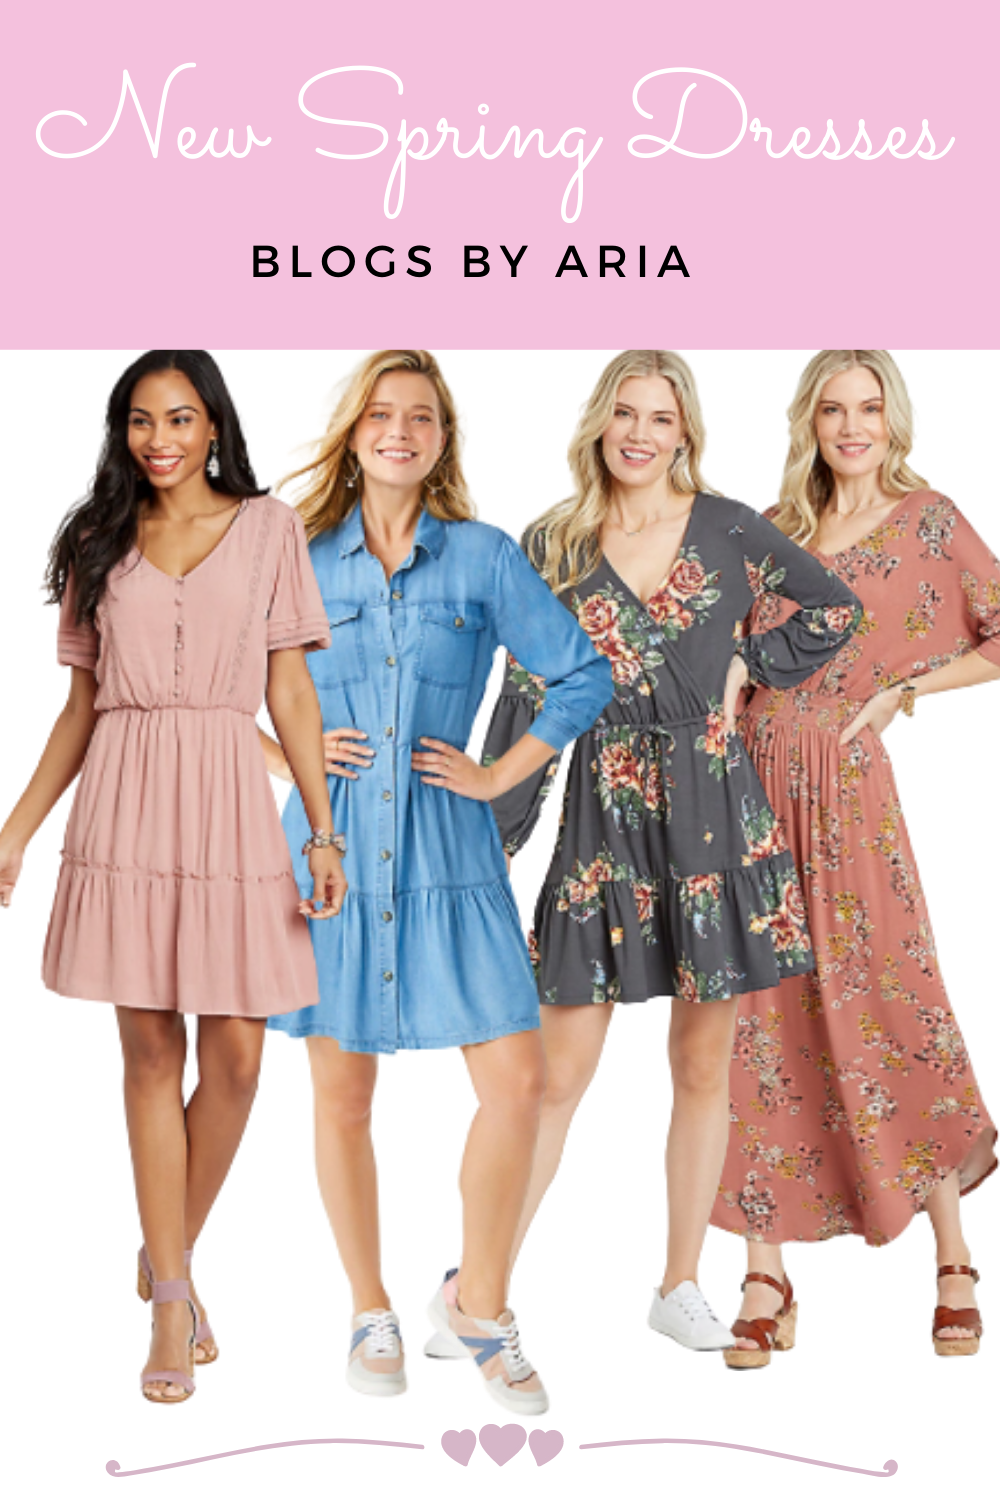 Spring Fashion Finds - Blogs by Aria